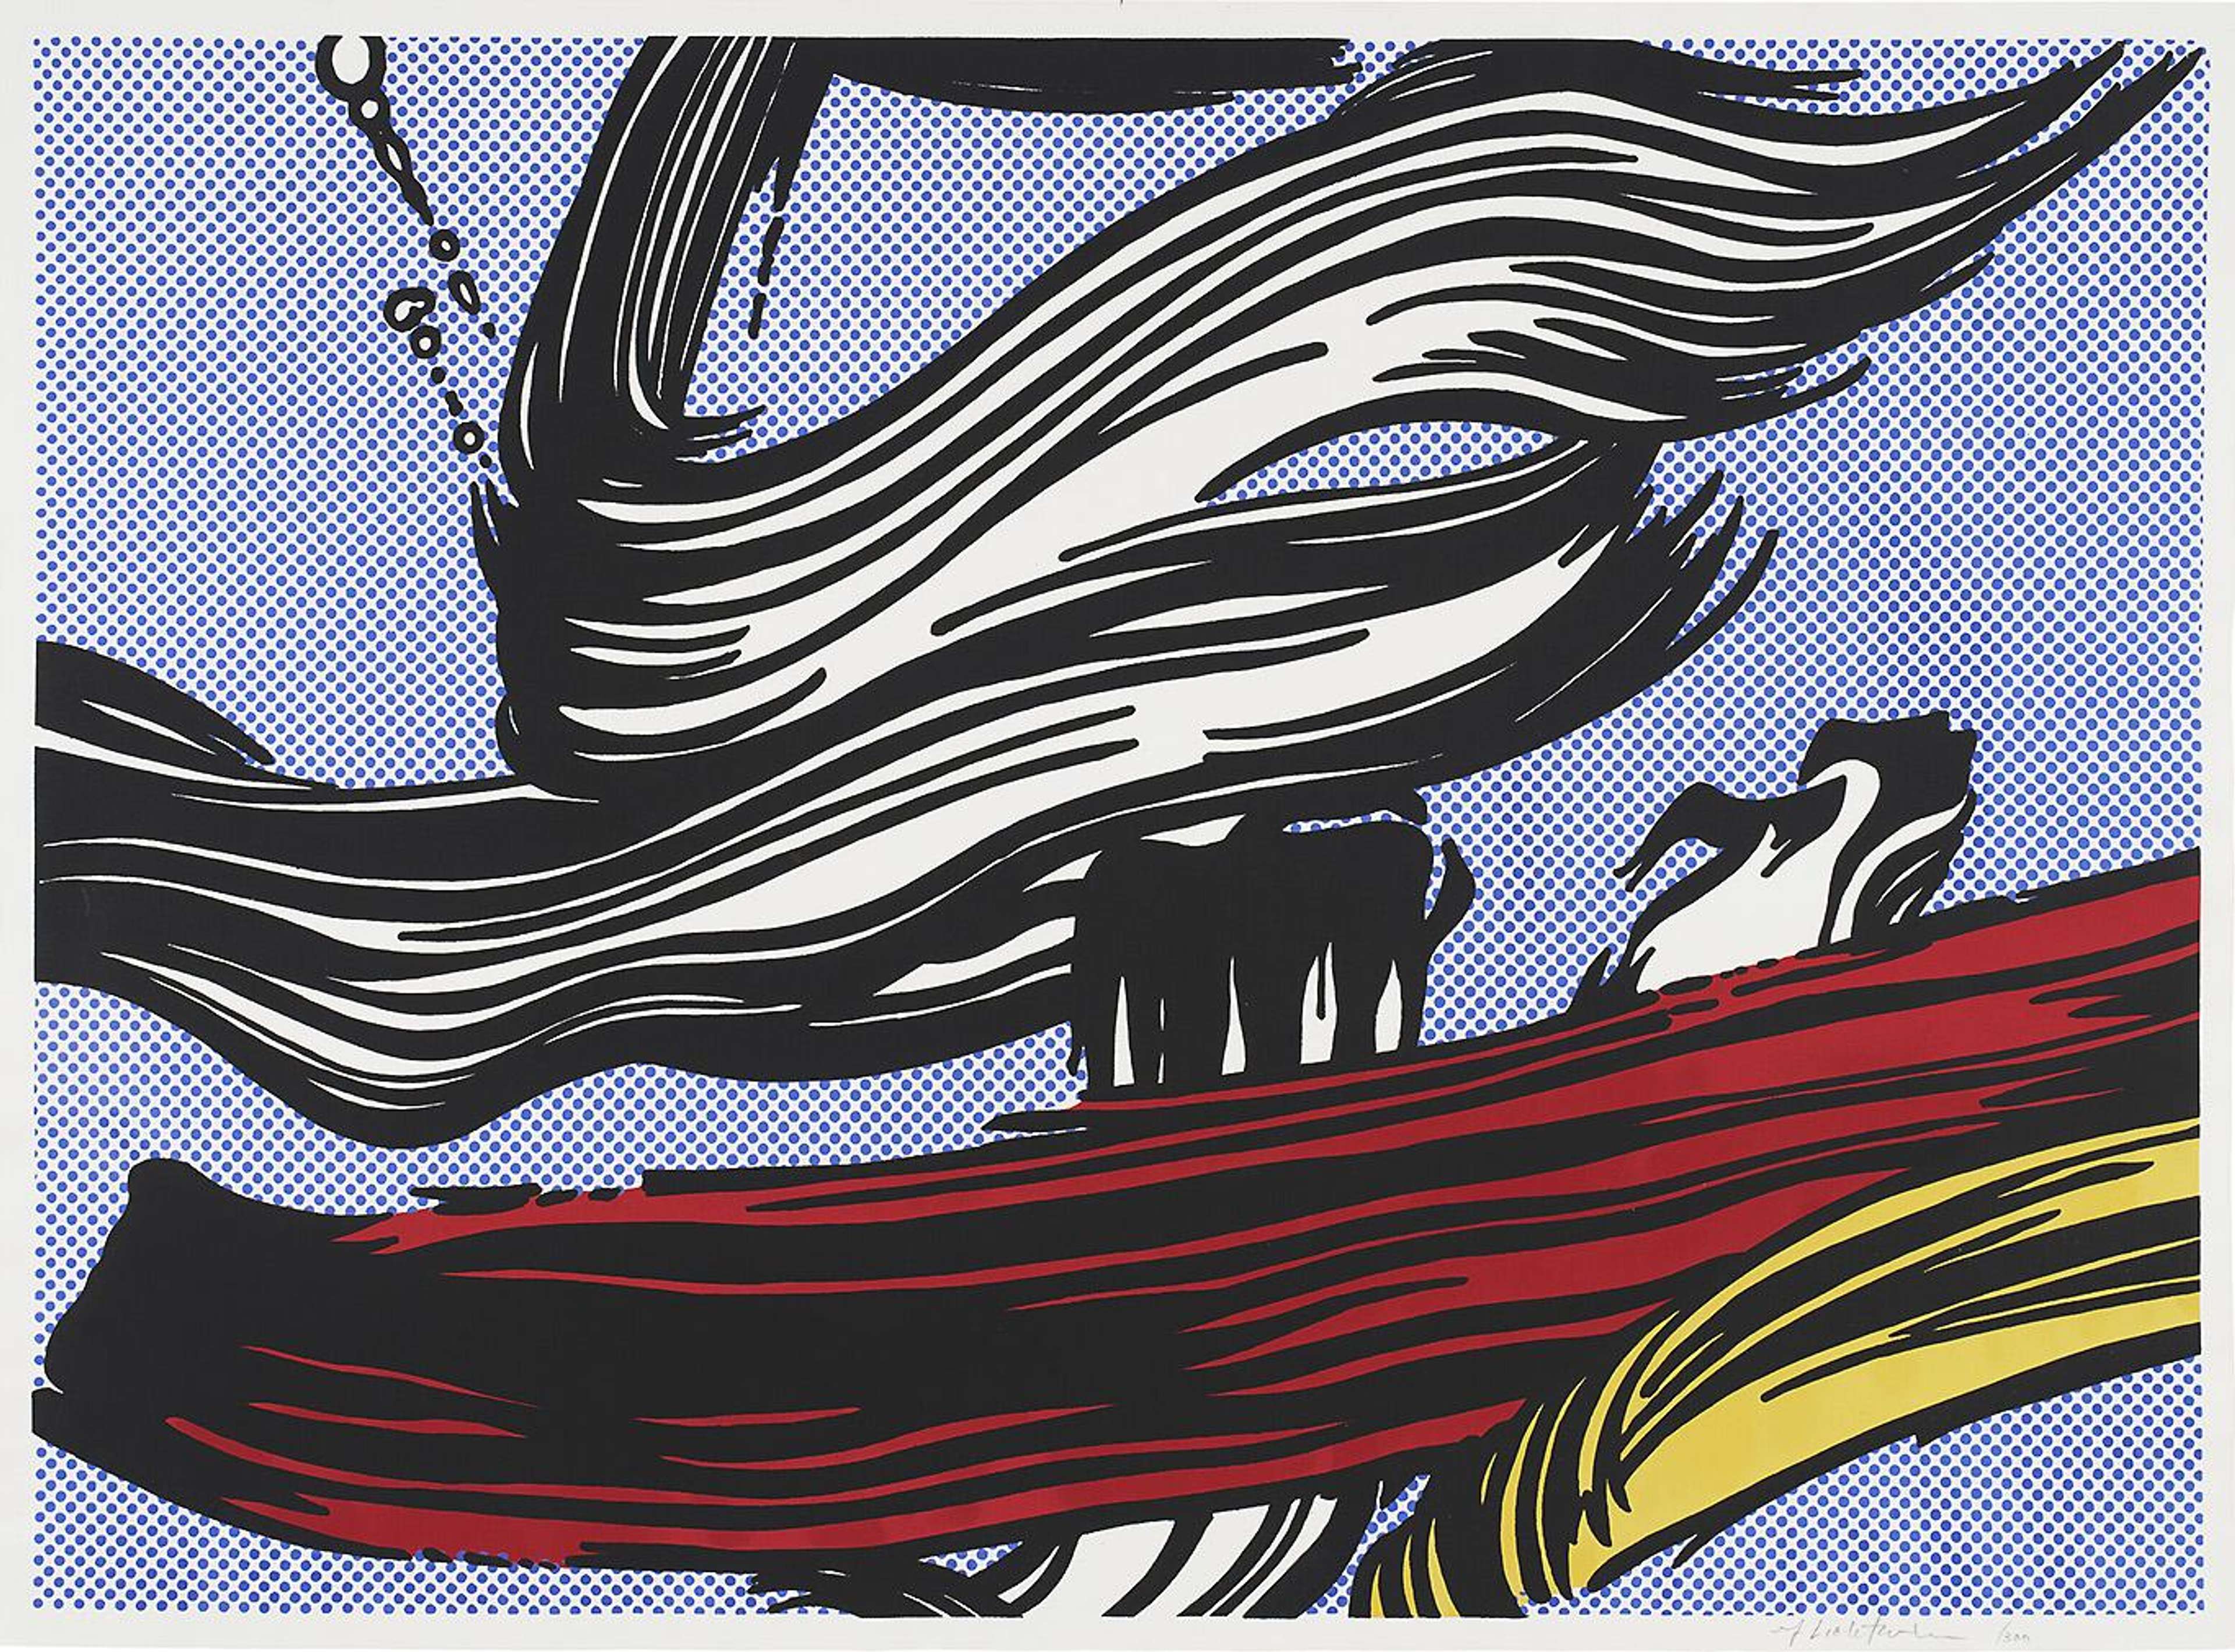 An image of the print Brushstrokes by Roy Lichtenstein. It features a series of graphic looking brushstrokes, in red, yellow and white, against a background of Ben-Day dots.